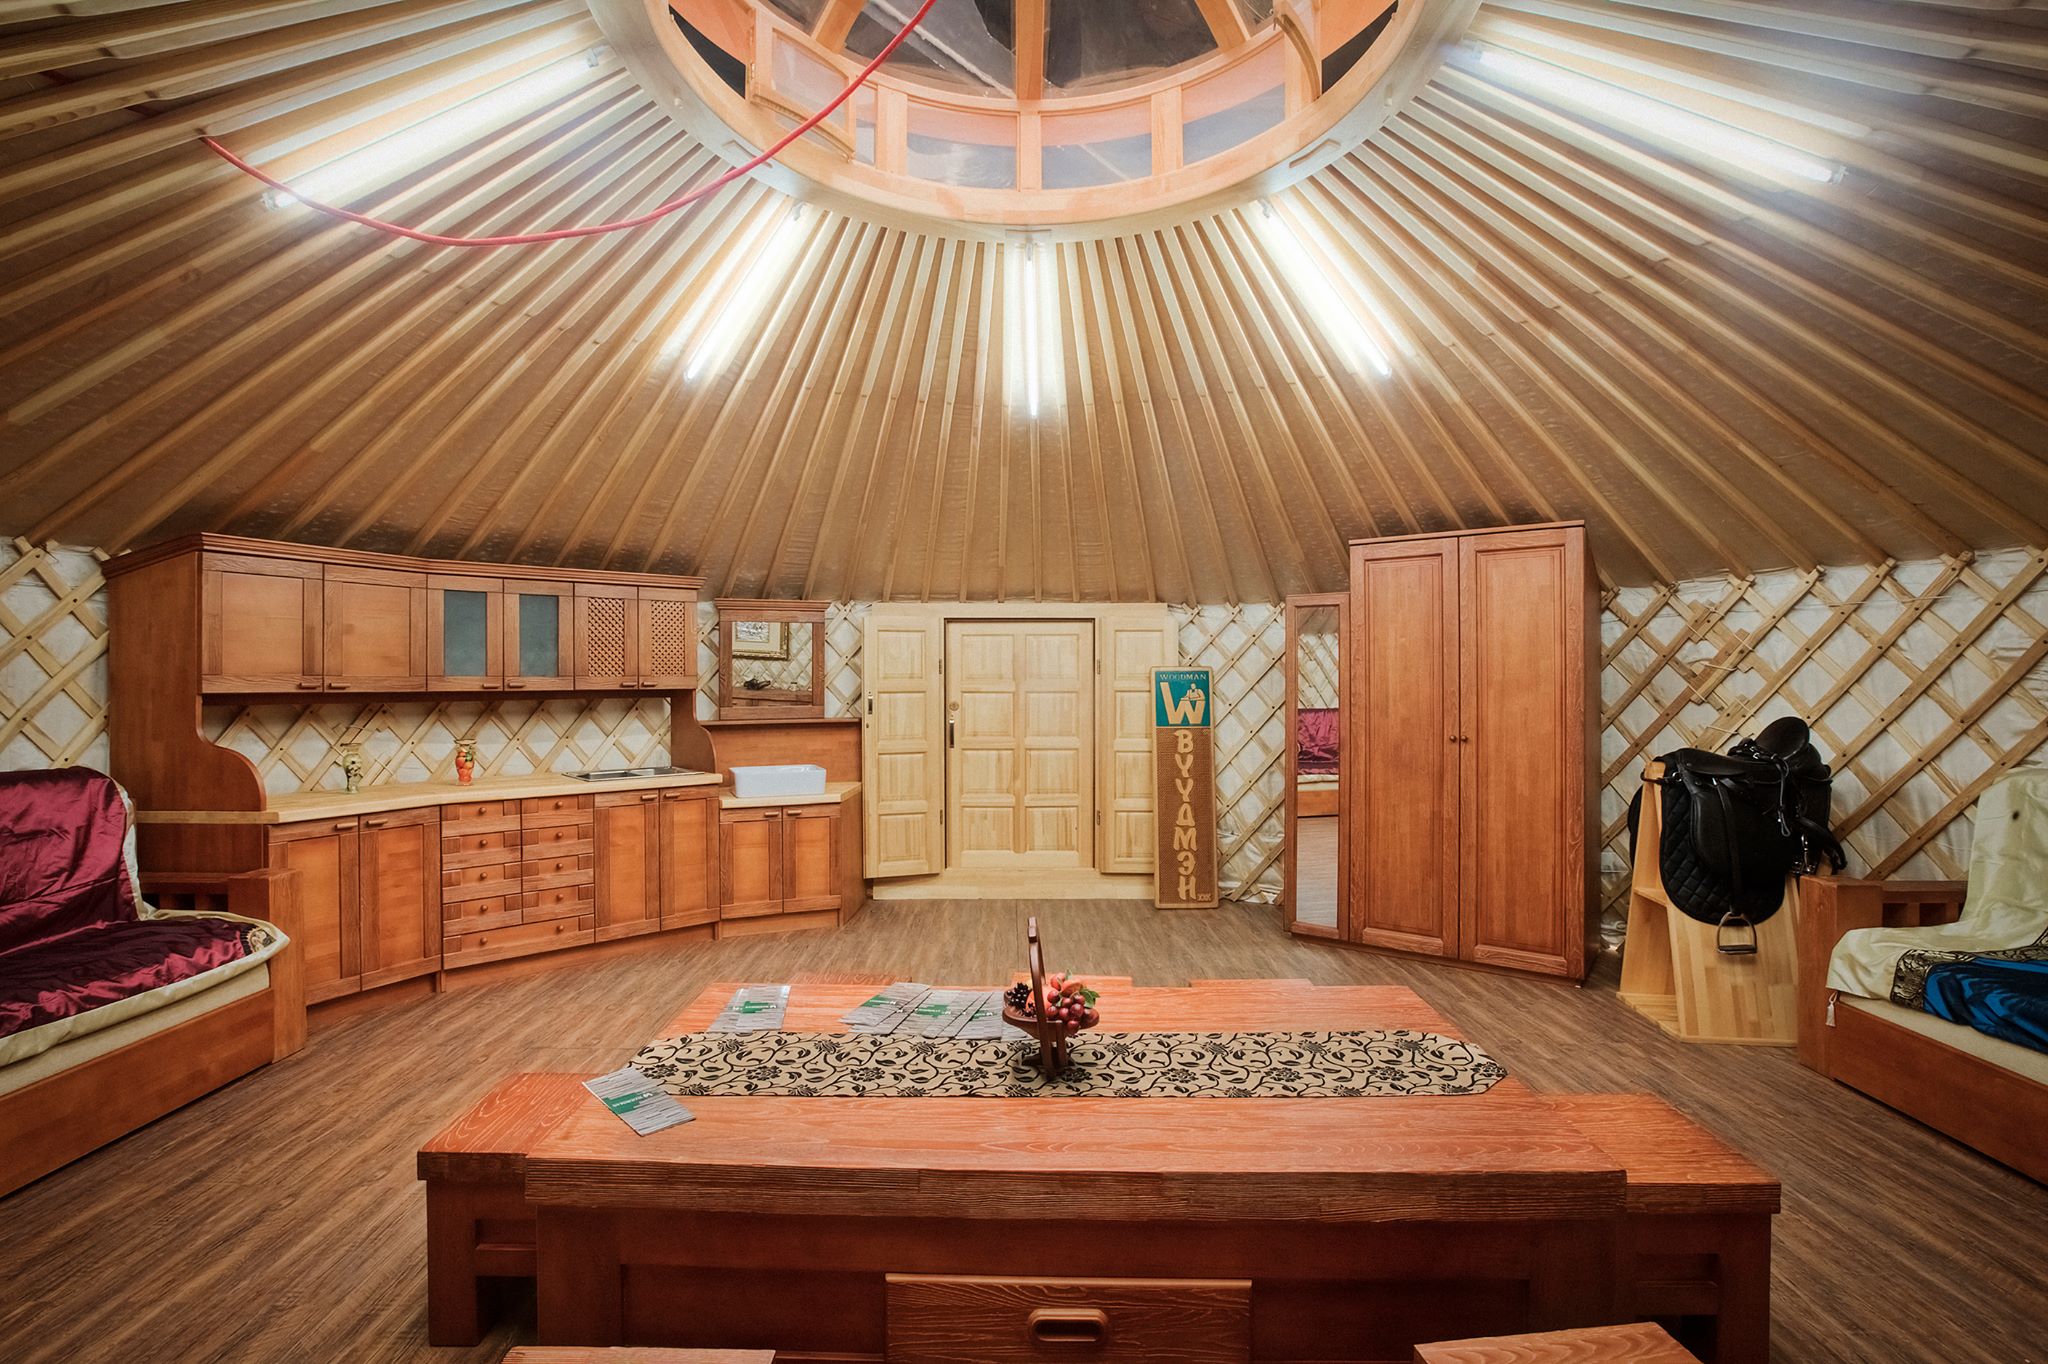 What is inside a yurt?